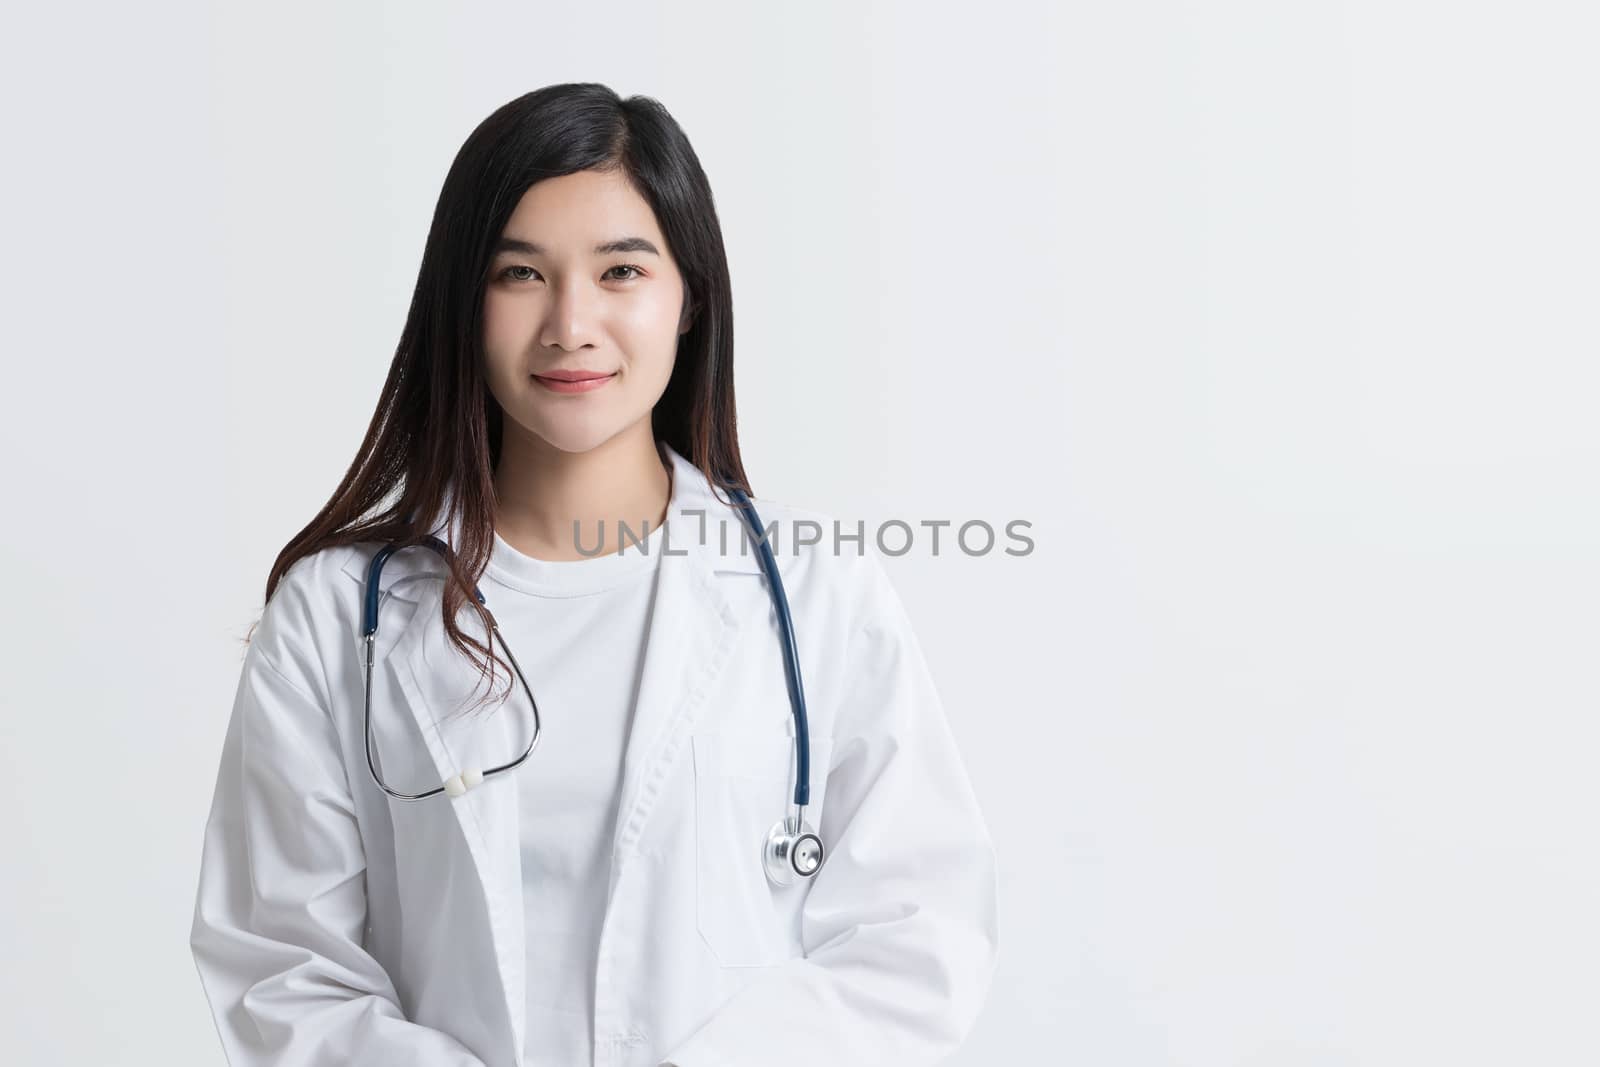 attractive Asian female doctor looking at camera with smiling face, isolated on white background with copy space. studio shot